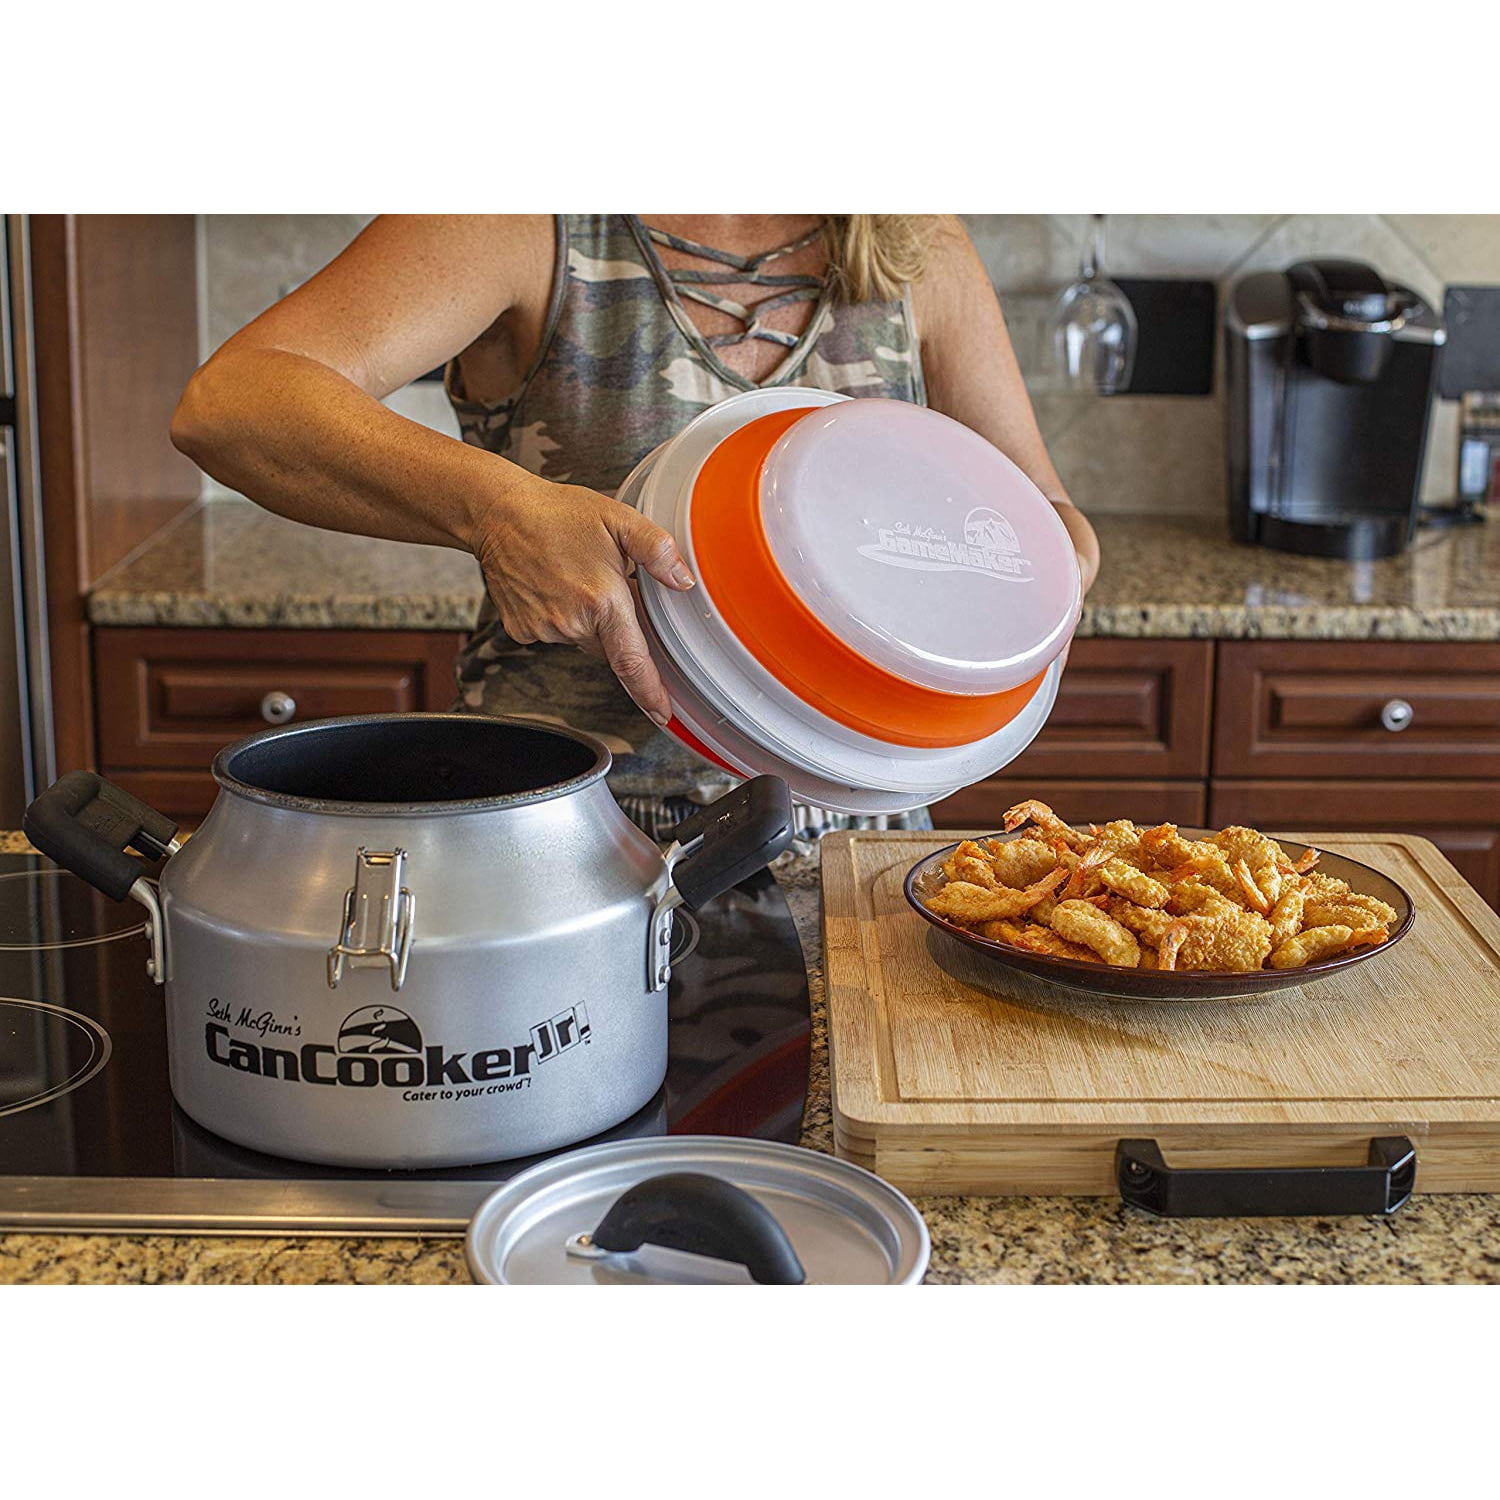 CanCooker XL Chemical-free Collapsible Food Batter/Breading Cooking Bowl,  Orange, 1 Piece - Kroger